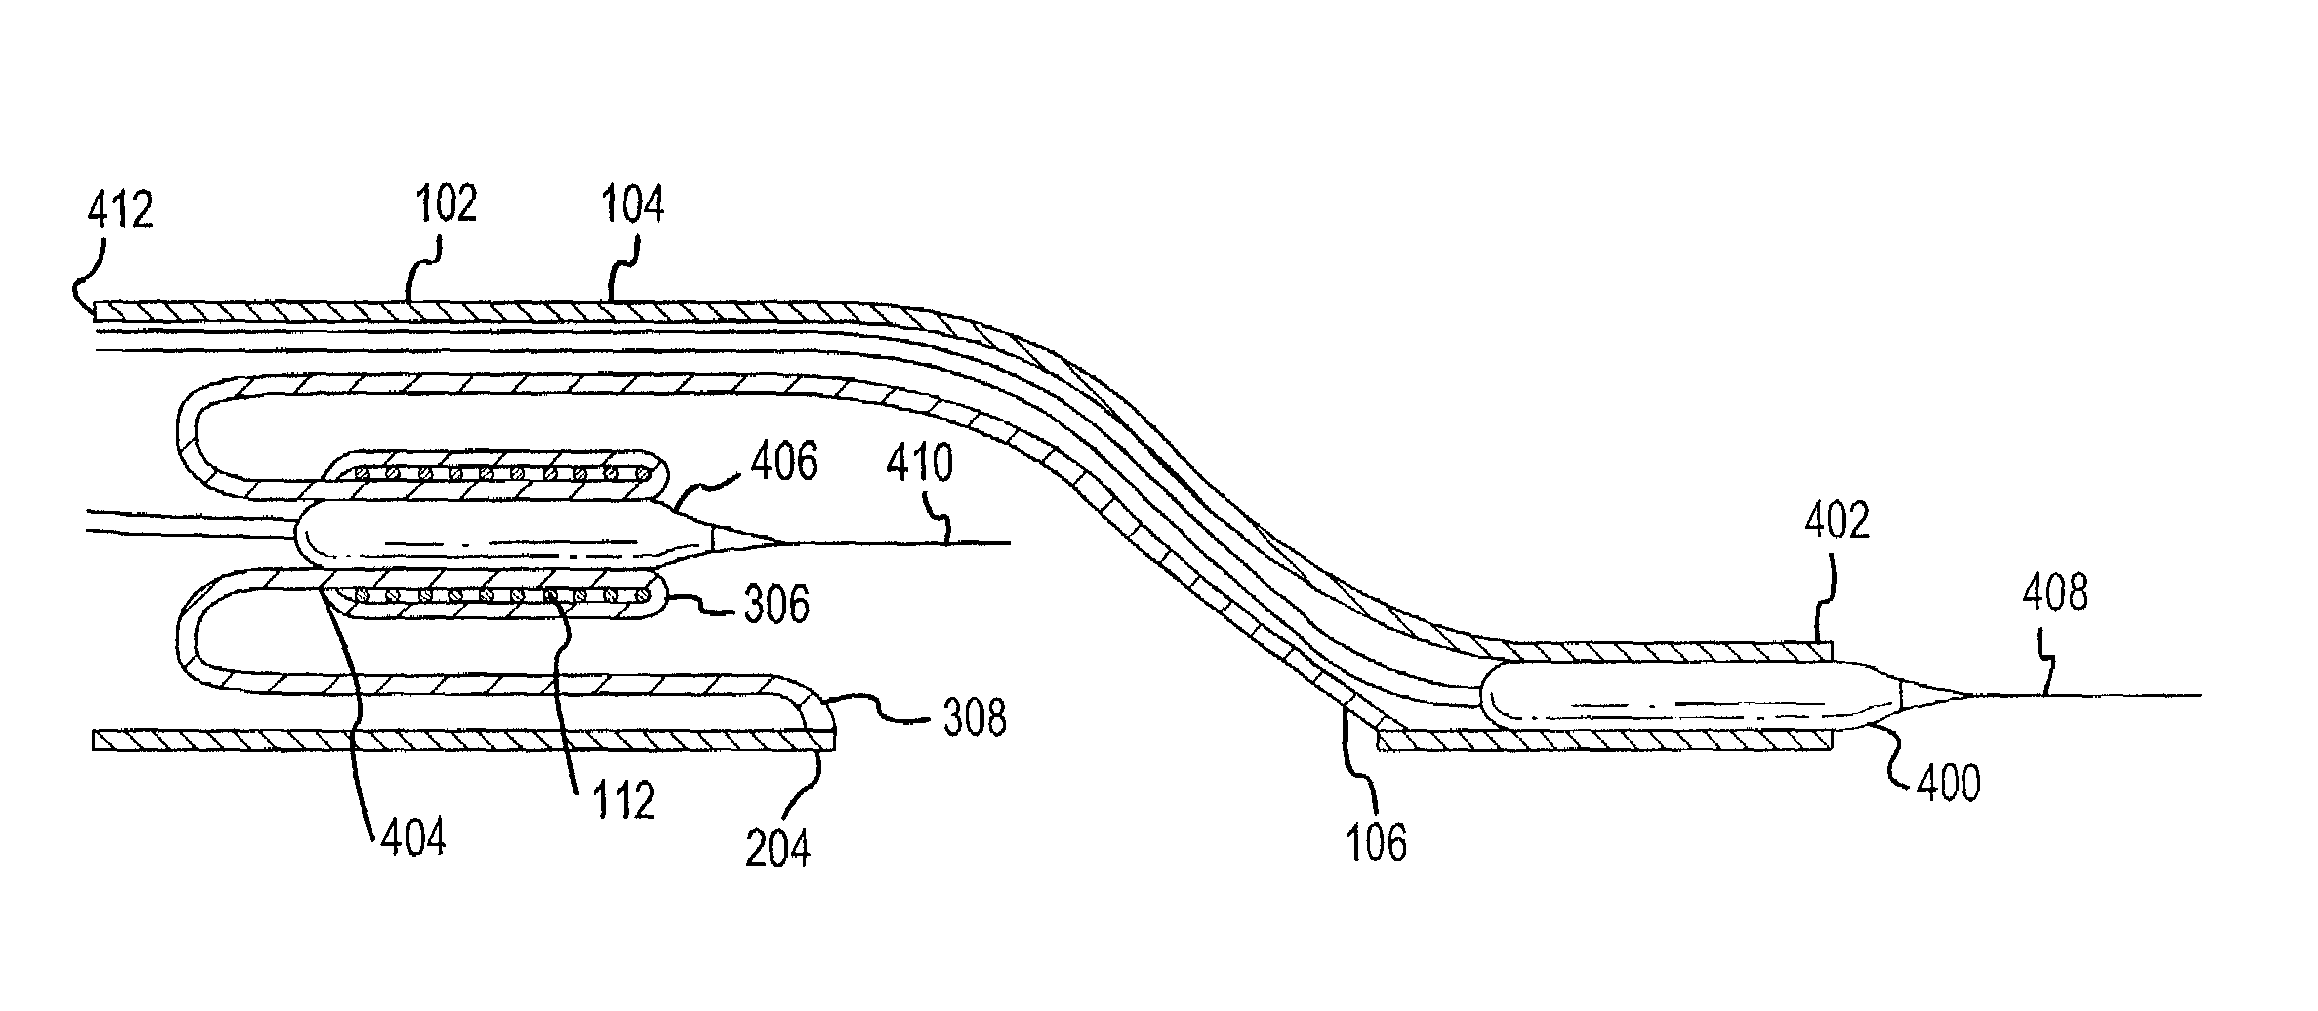 Apparatus and methods for conduits and materials